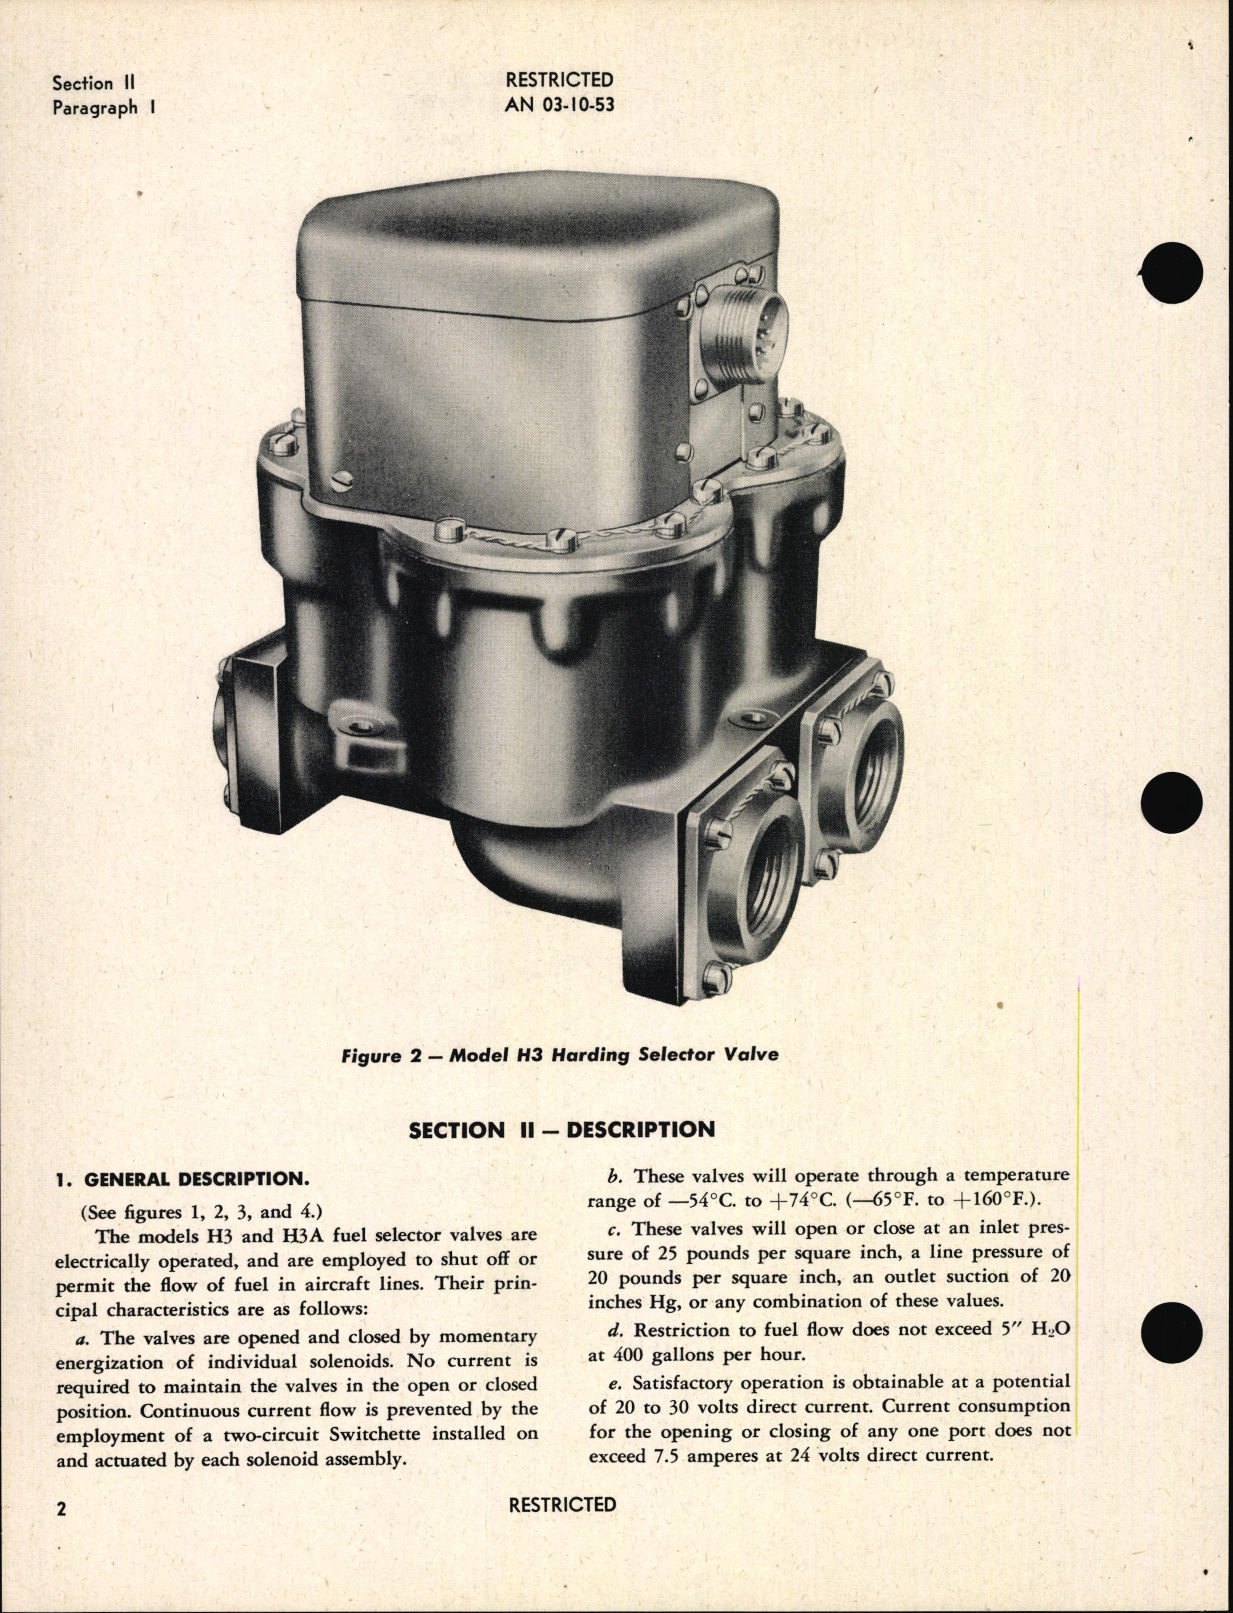 Sample page 6 from AirCorps Library document: Overhaul Instructions with Parts Catalog for Fuel Selector Valves Models H3 and H3A